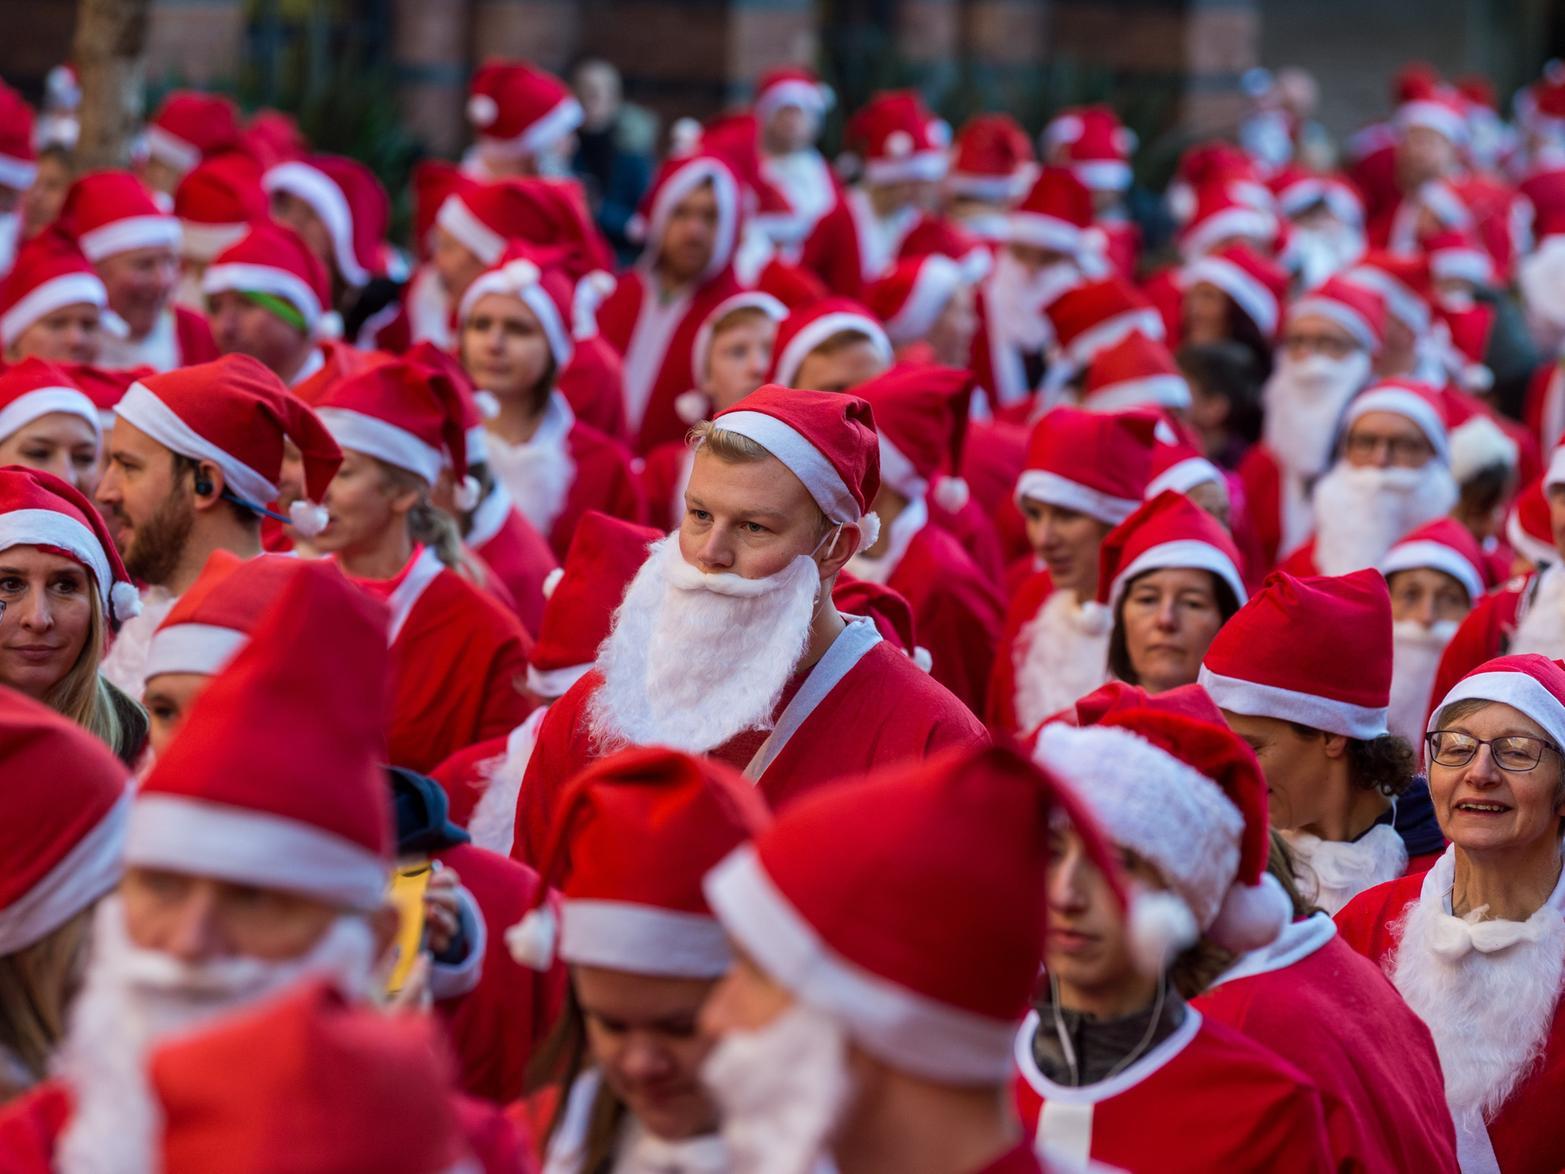 Expect to see the colourful sight of hundreds of Santas dashing through the city centre all raising vital funds for St Gemma's Hospice on Sunday, December 15.